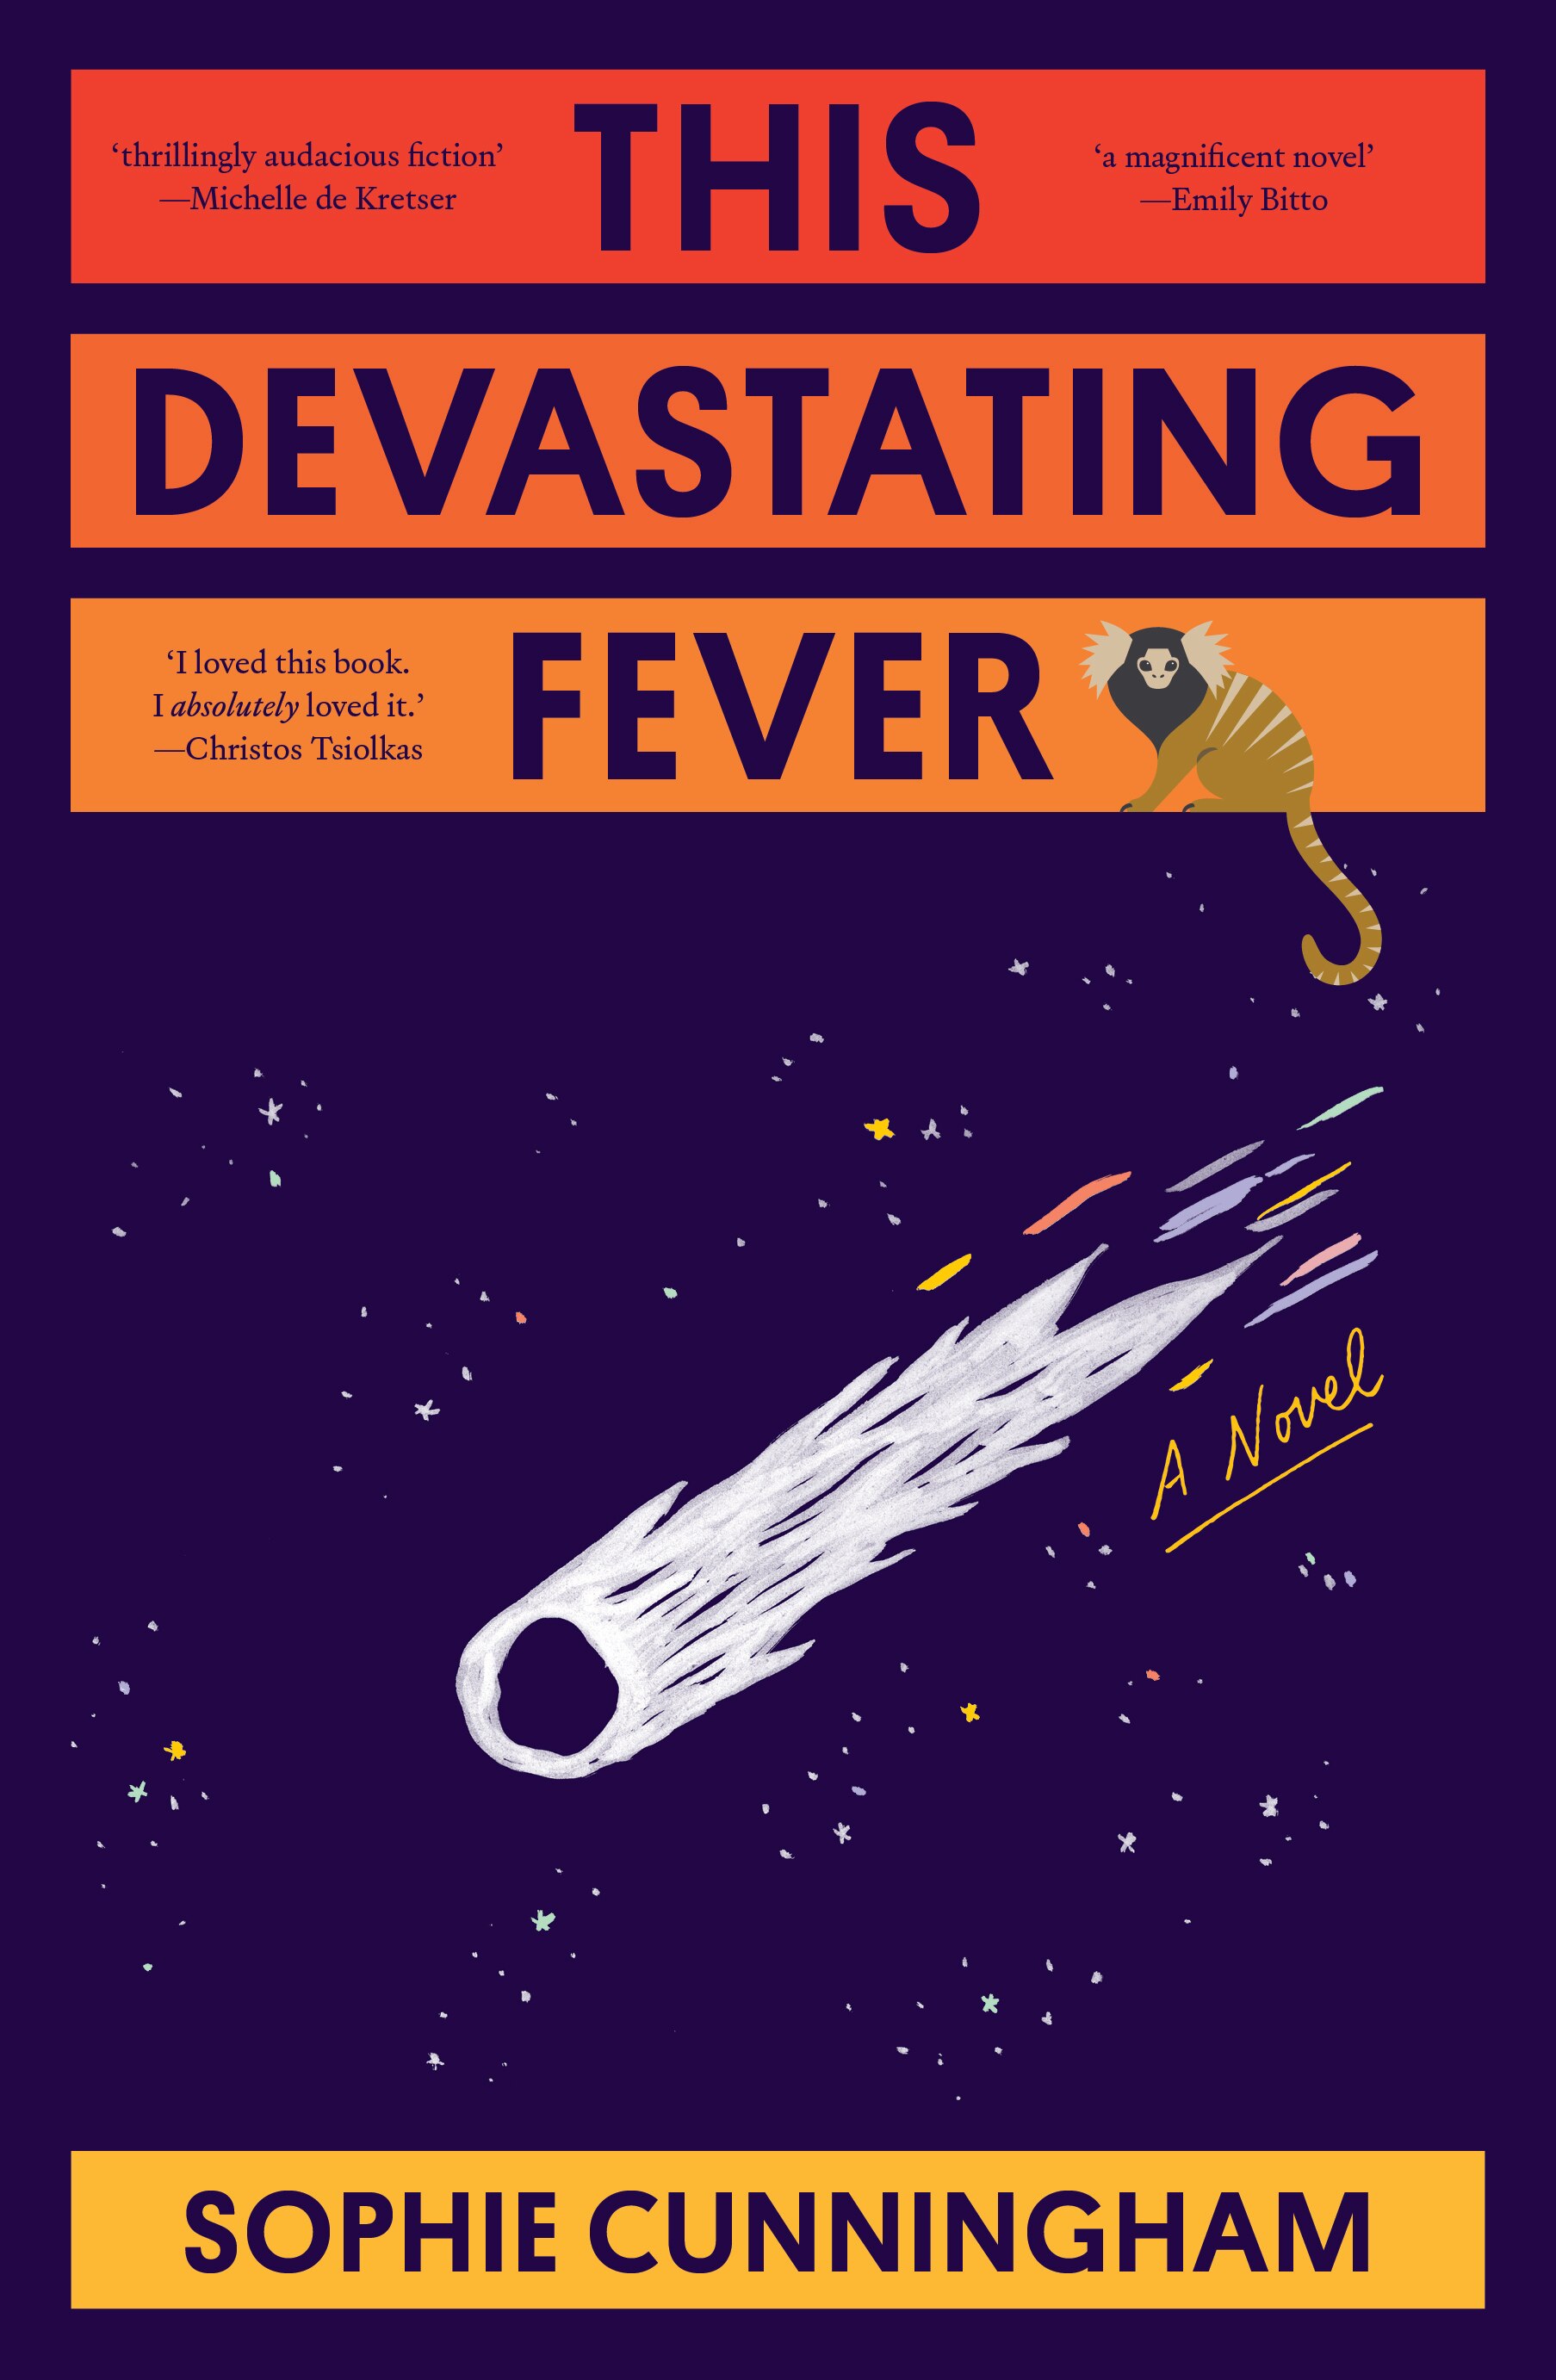 Book cover with blue background showing a comet and the text: This Devastating Fever by Sophie Cunningham